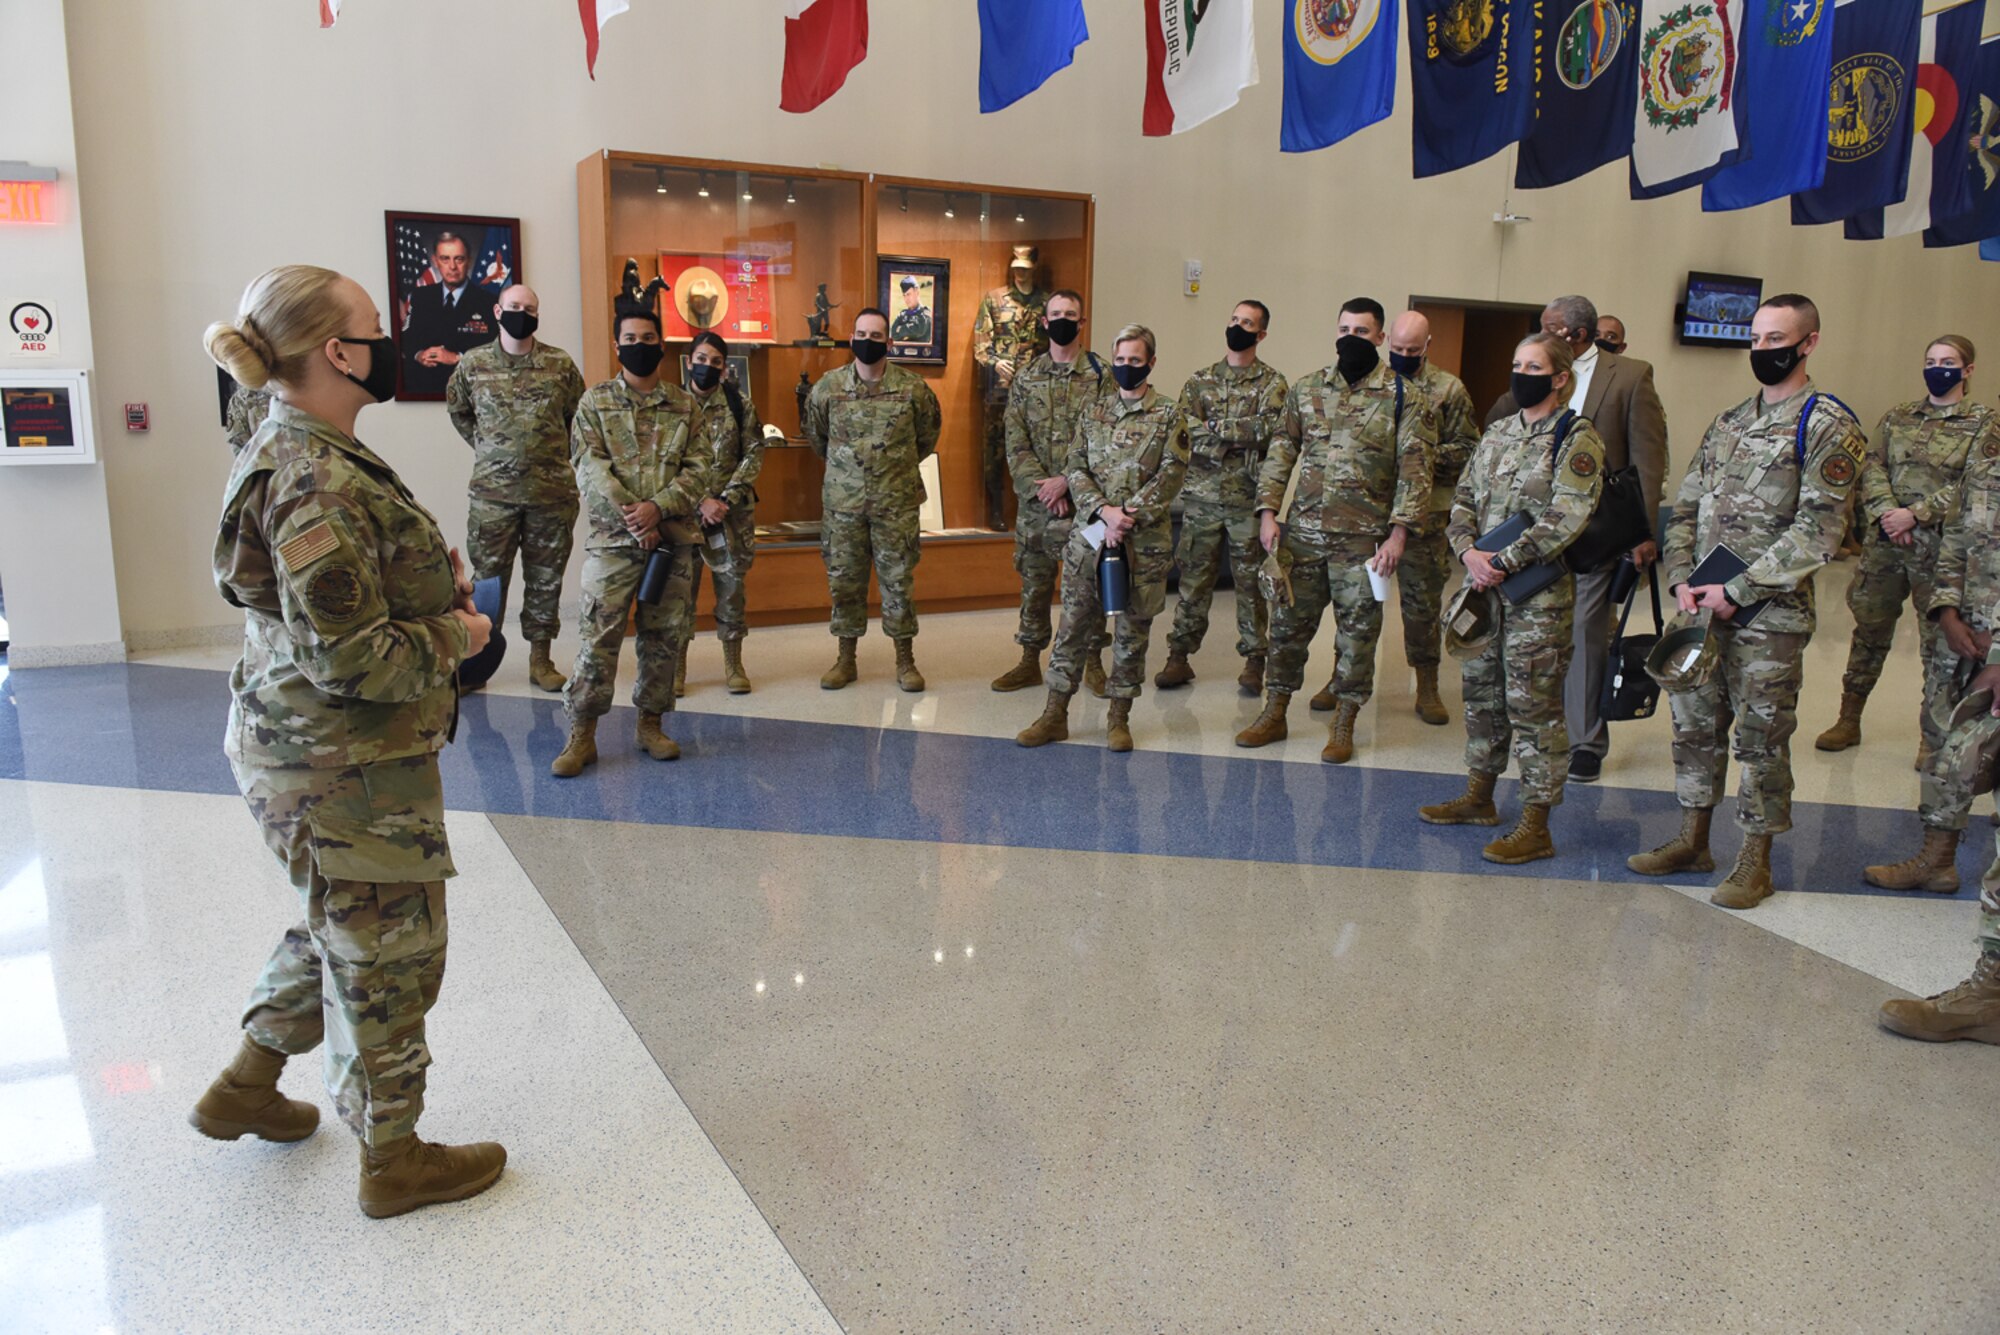 NCO gives tour of PRC